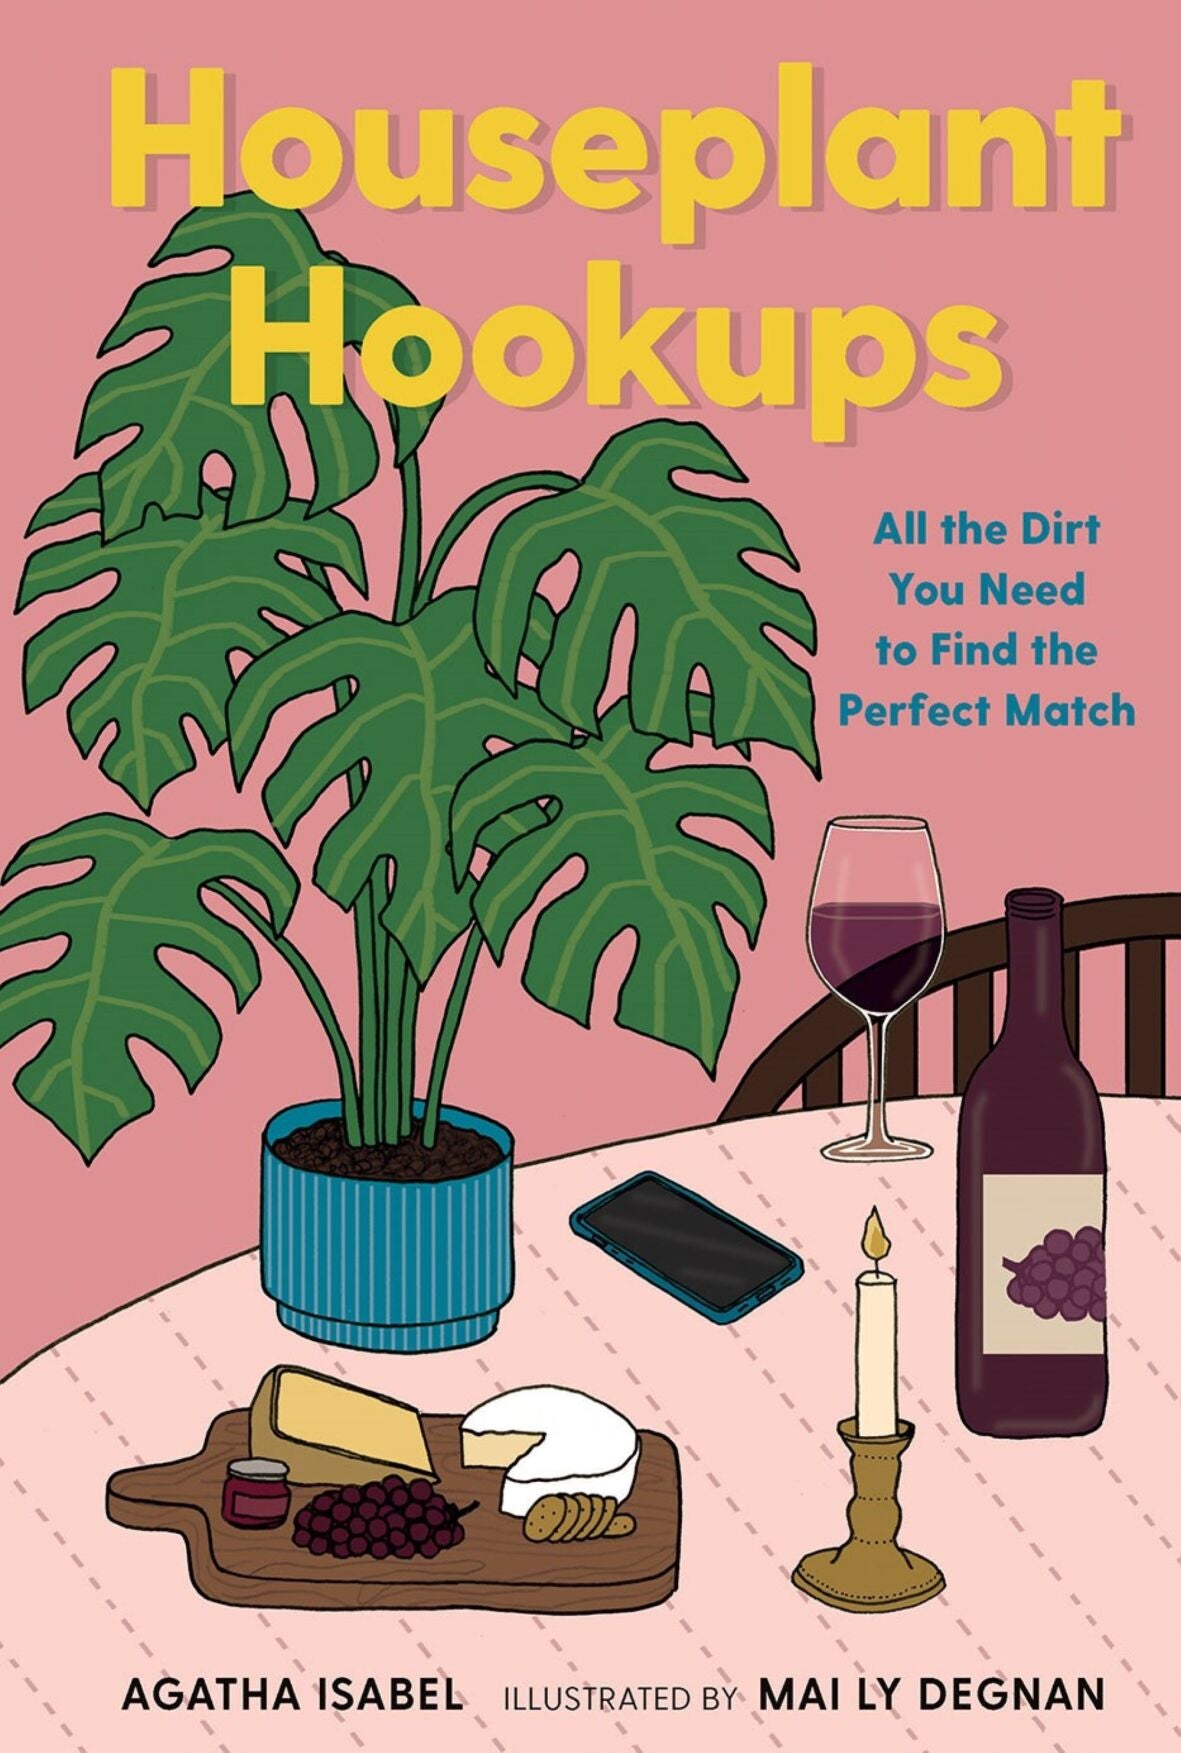 Houseplant Hookups by Agatha Isabel and Mai Ly Gegnan